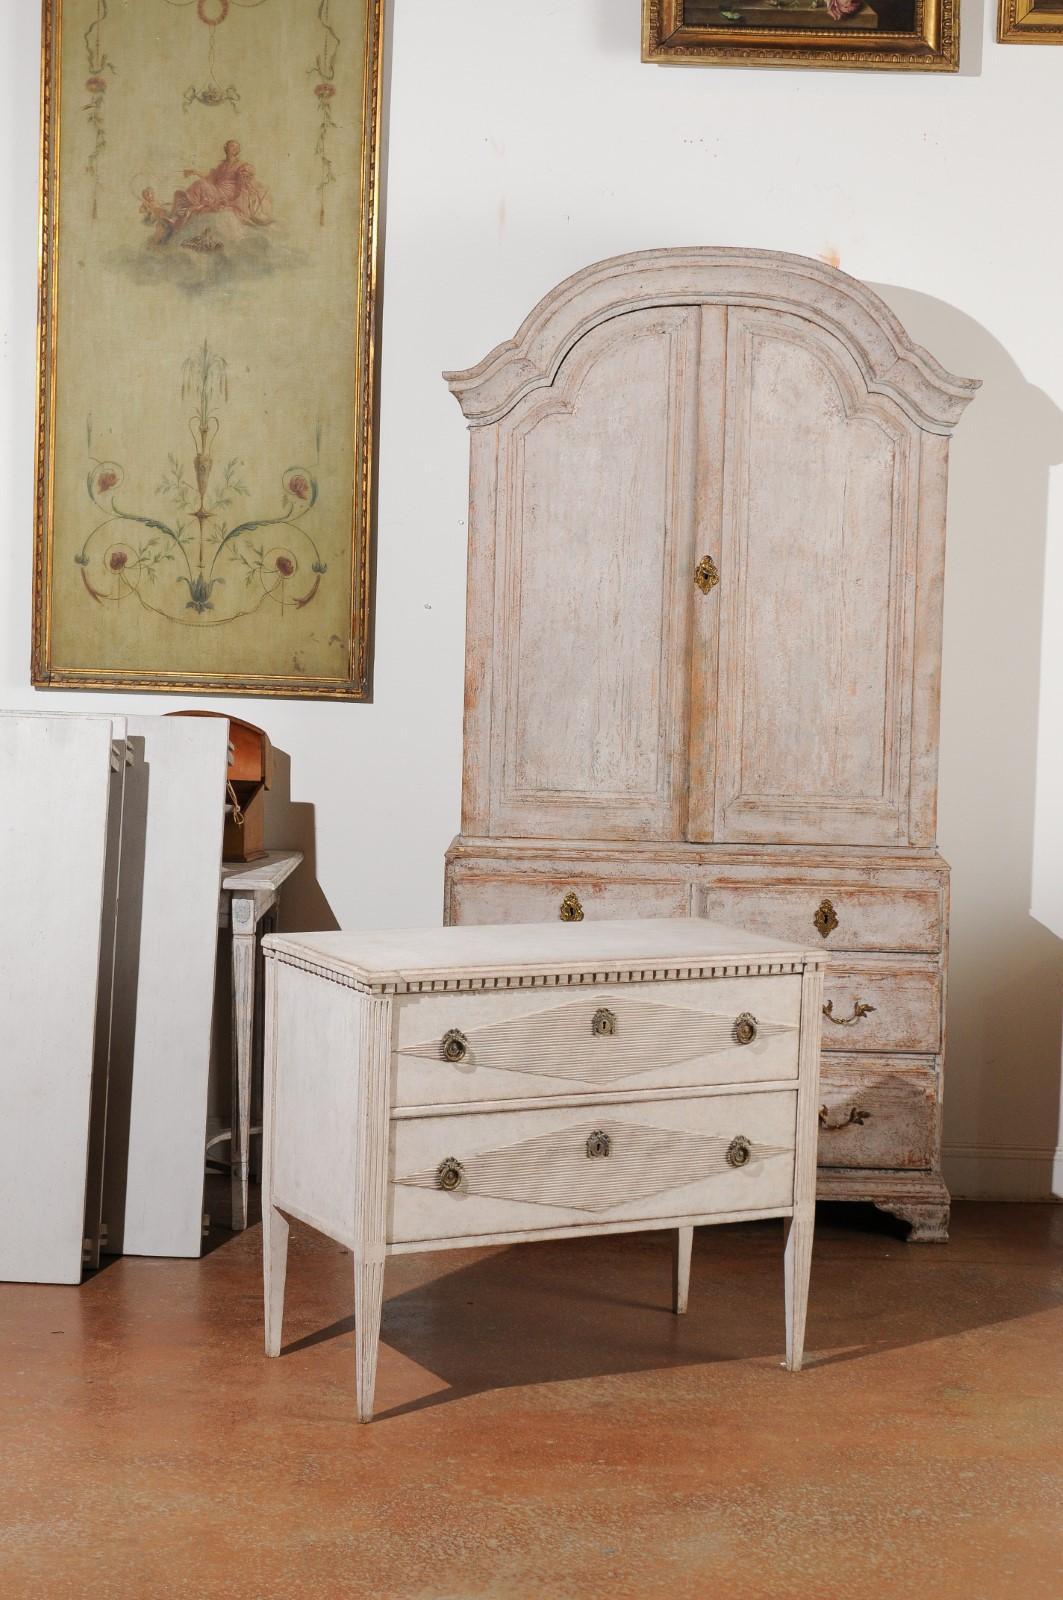 A Swedish Gustavian style painted wood chest of drawers from the 19th century, with reeded diamond motifs and dentil molding. Created in Sweden during the 19th century, this Gustavian style chest features a rectangular top with protruding corners,